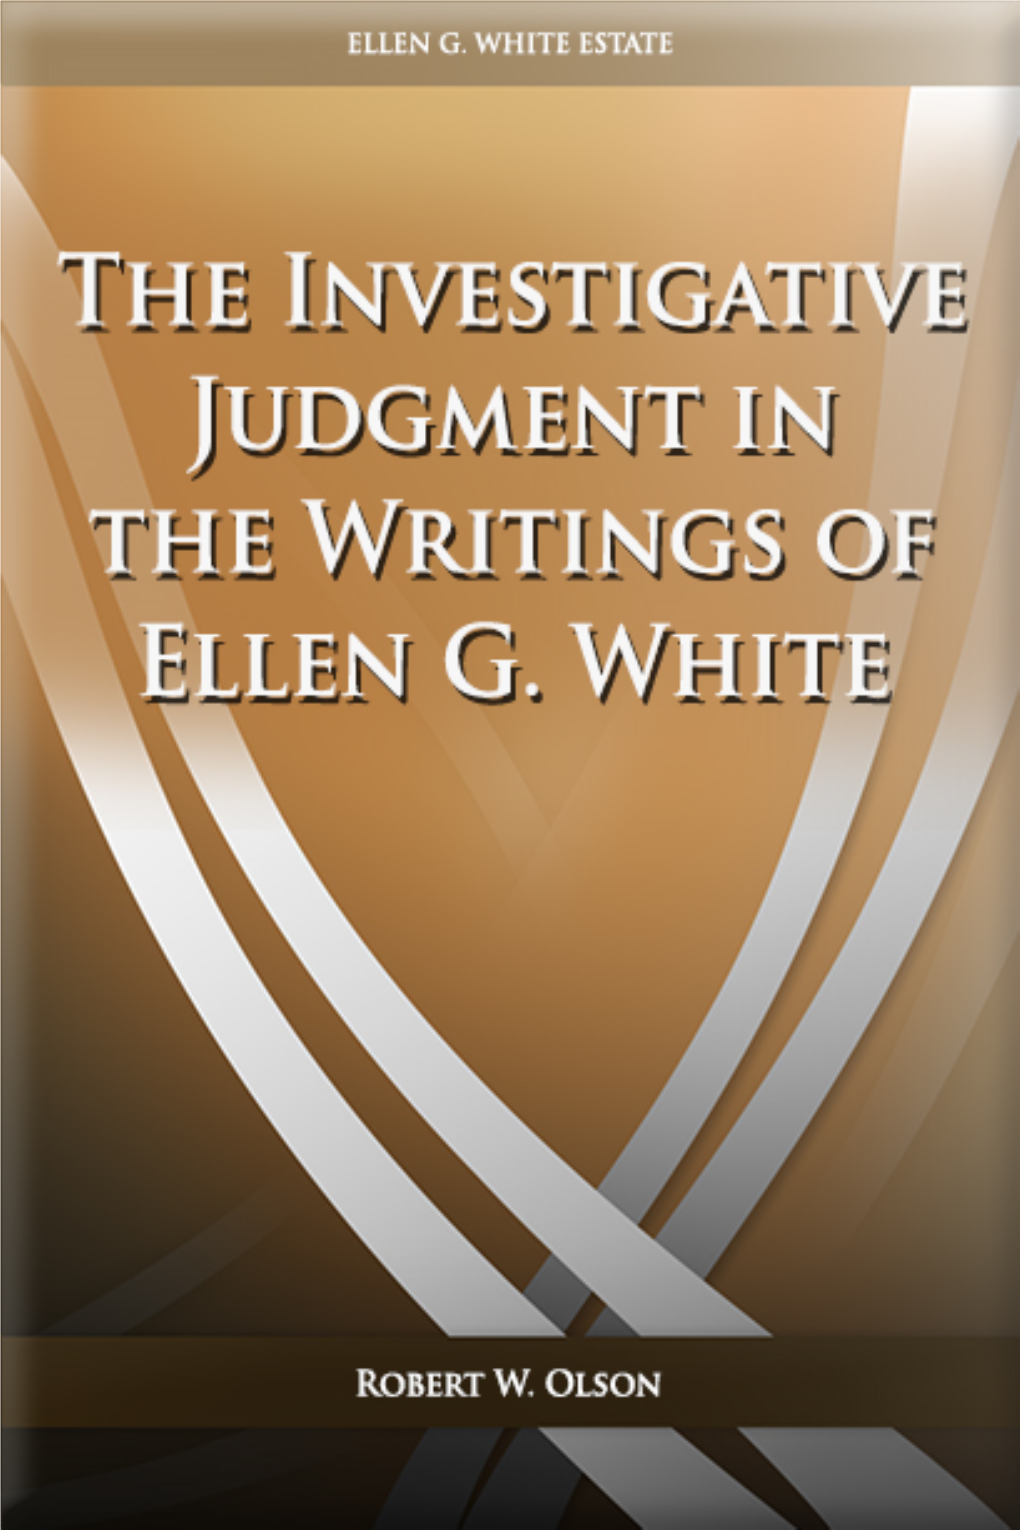 The Investigative Judgment in the Writings of Ellen G. White